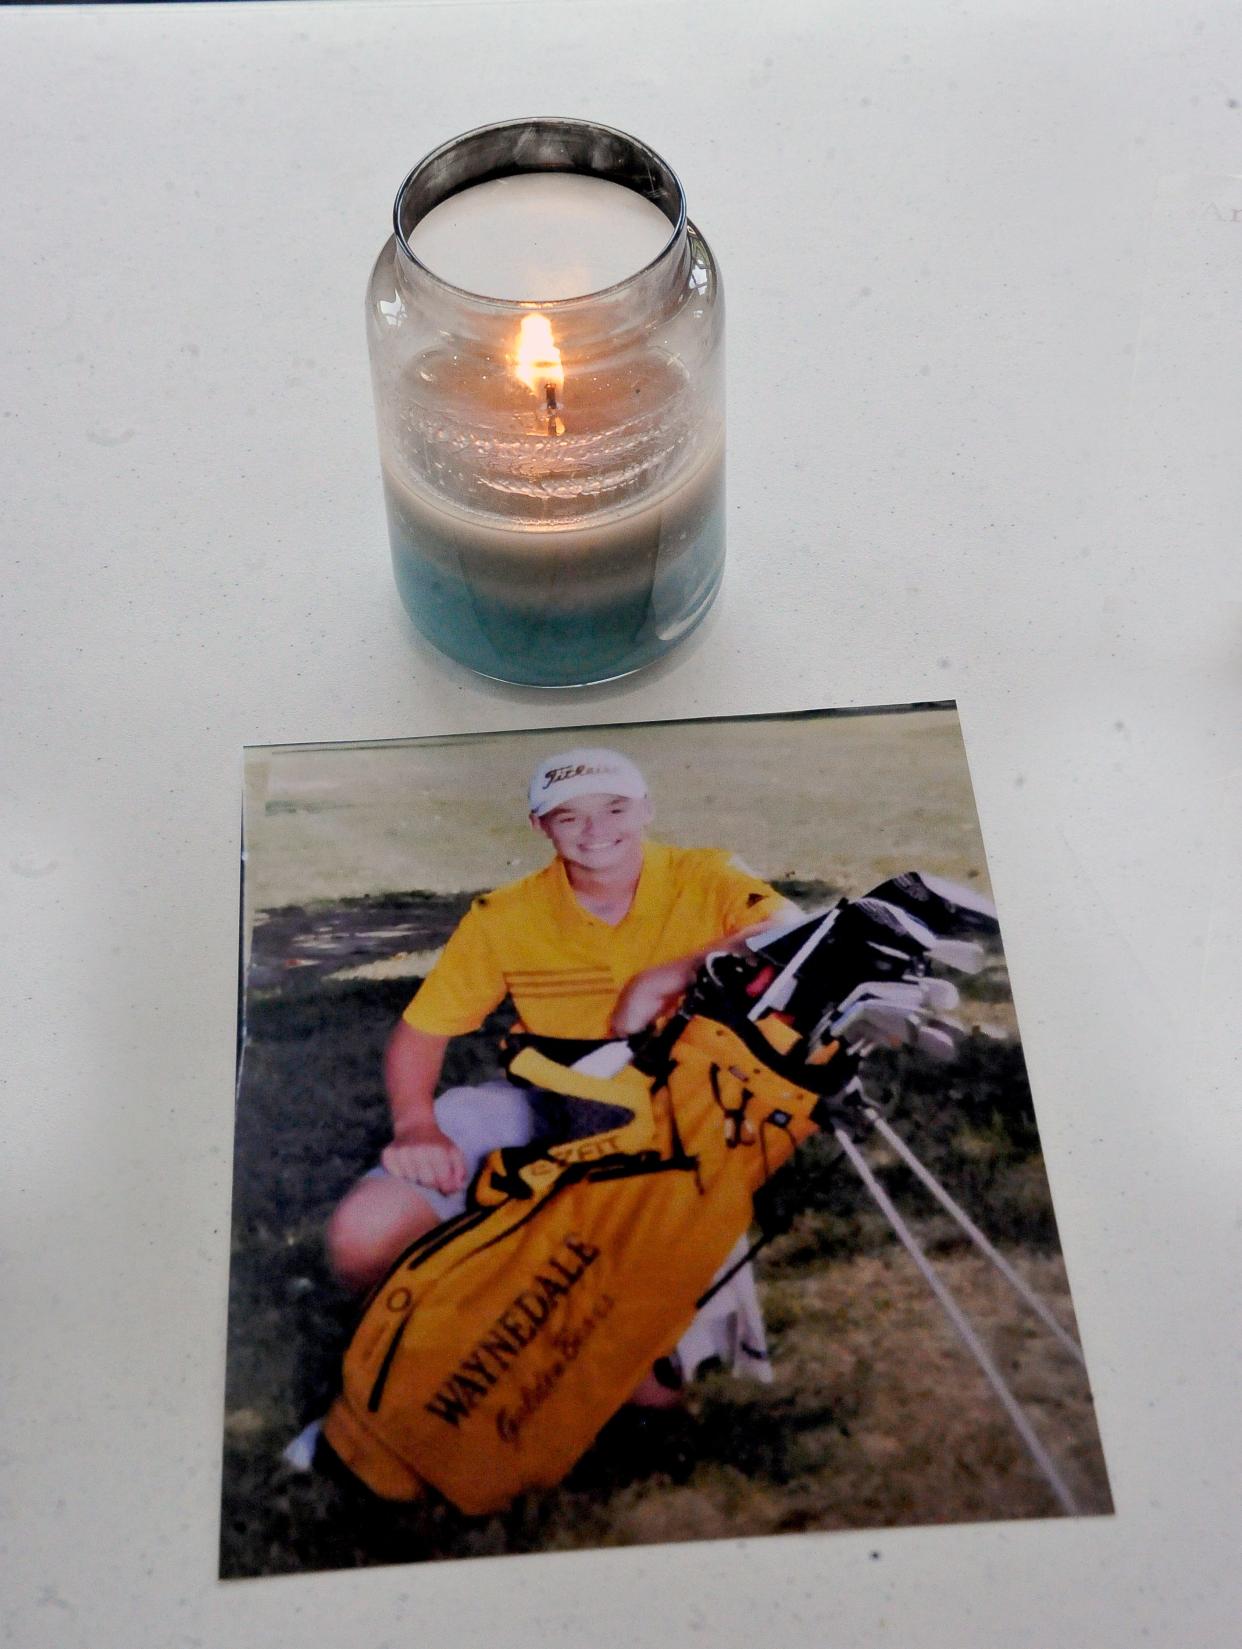 A photo of Deven "Deegan" Bee, with a candle in his memory, sat on a table at the Fredericksburg Presbyterian Church Friday. Waynedale High School, where Bee attended, set up the space at the church to provide "an opportunity for everyone to come together" following Bee's Wednesday death.